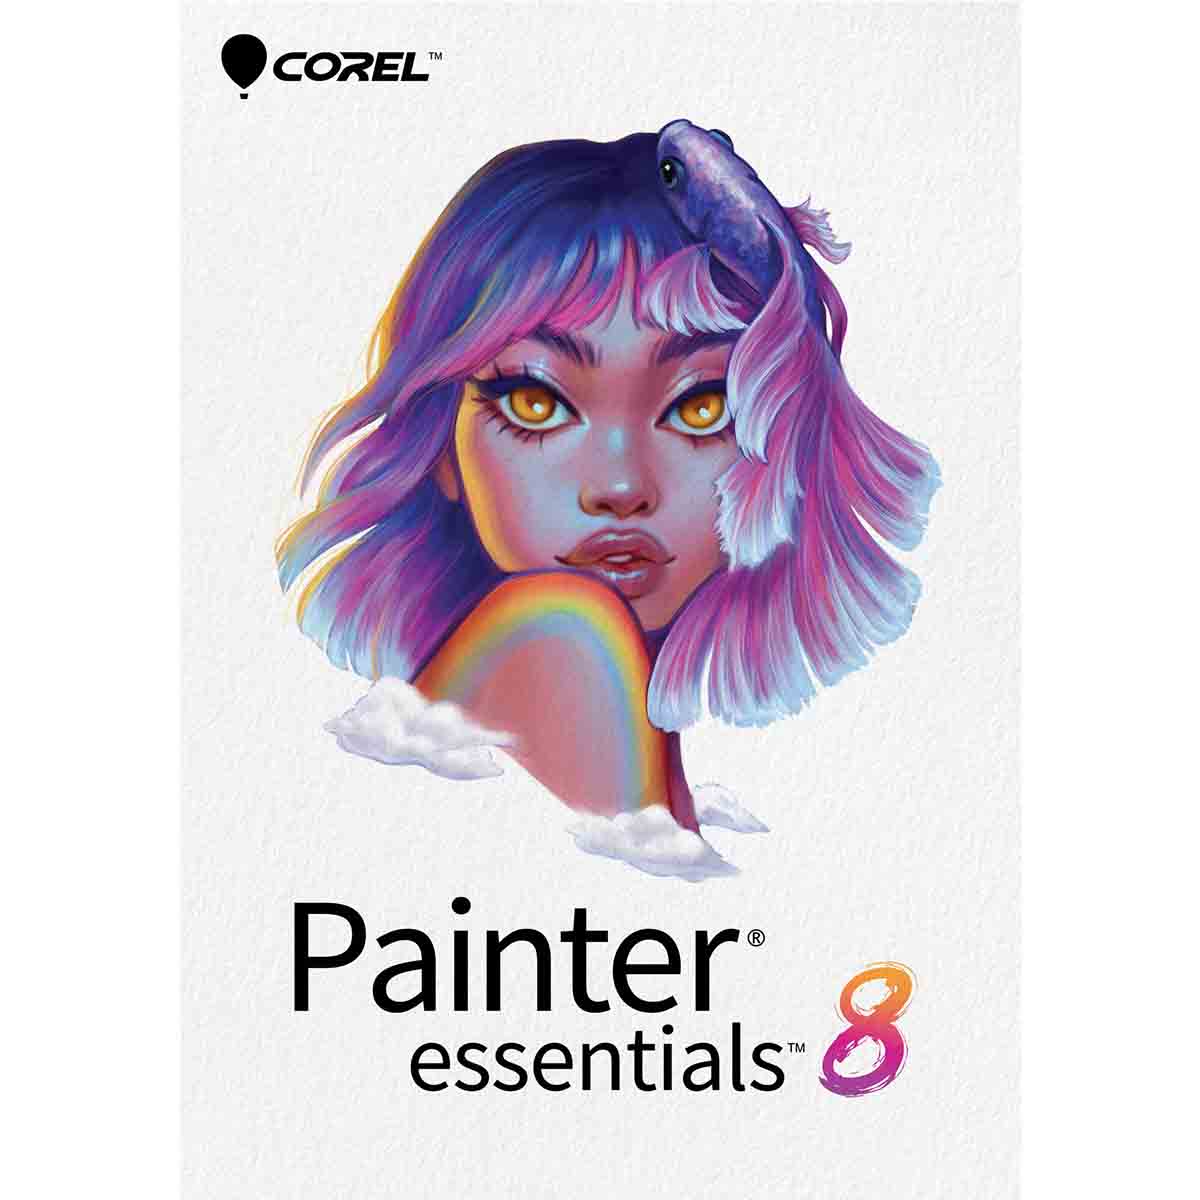 Buy Corel Painter Essentials 8 software or windows software at the best and cheap price on Fastestkey.com.